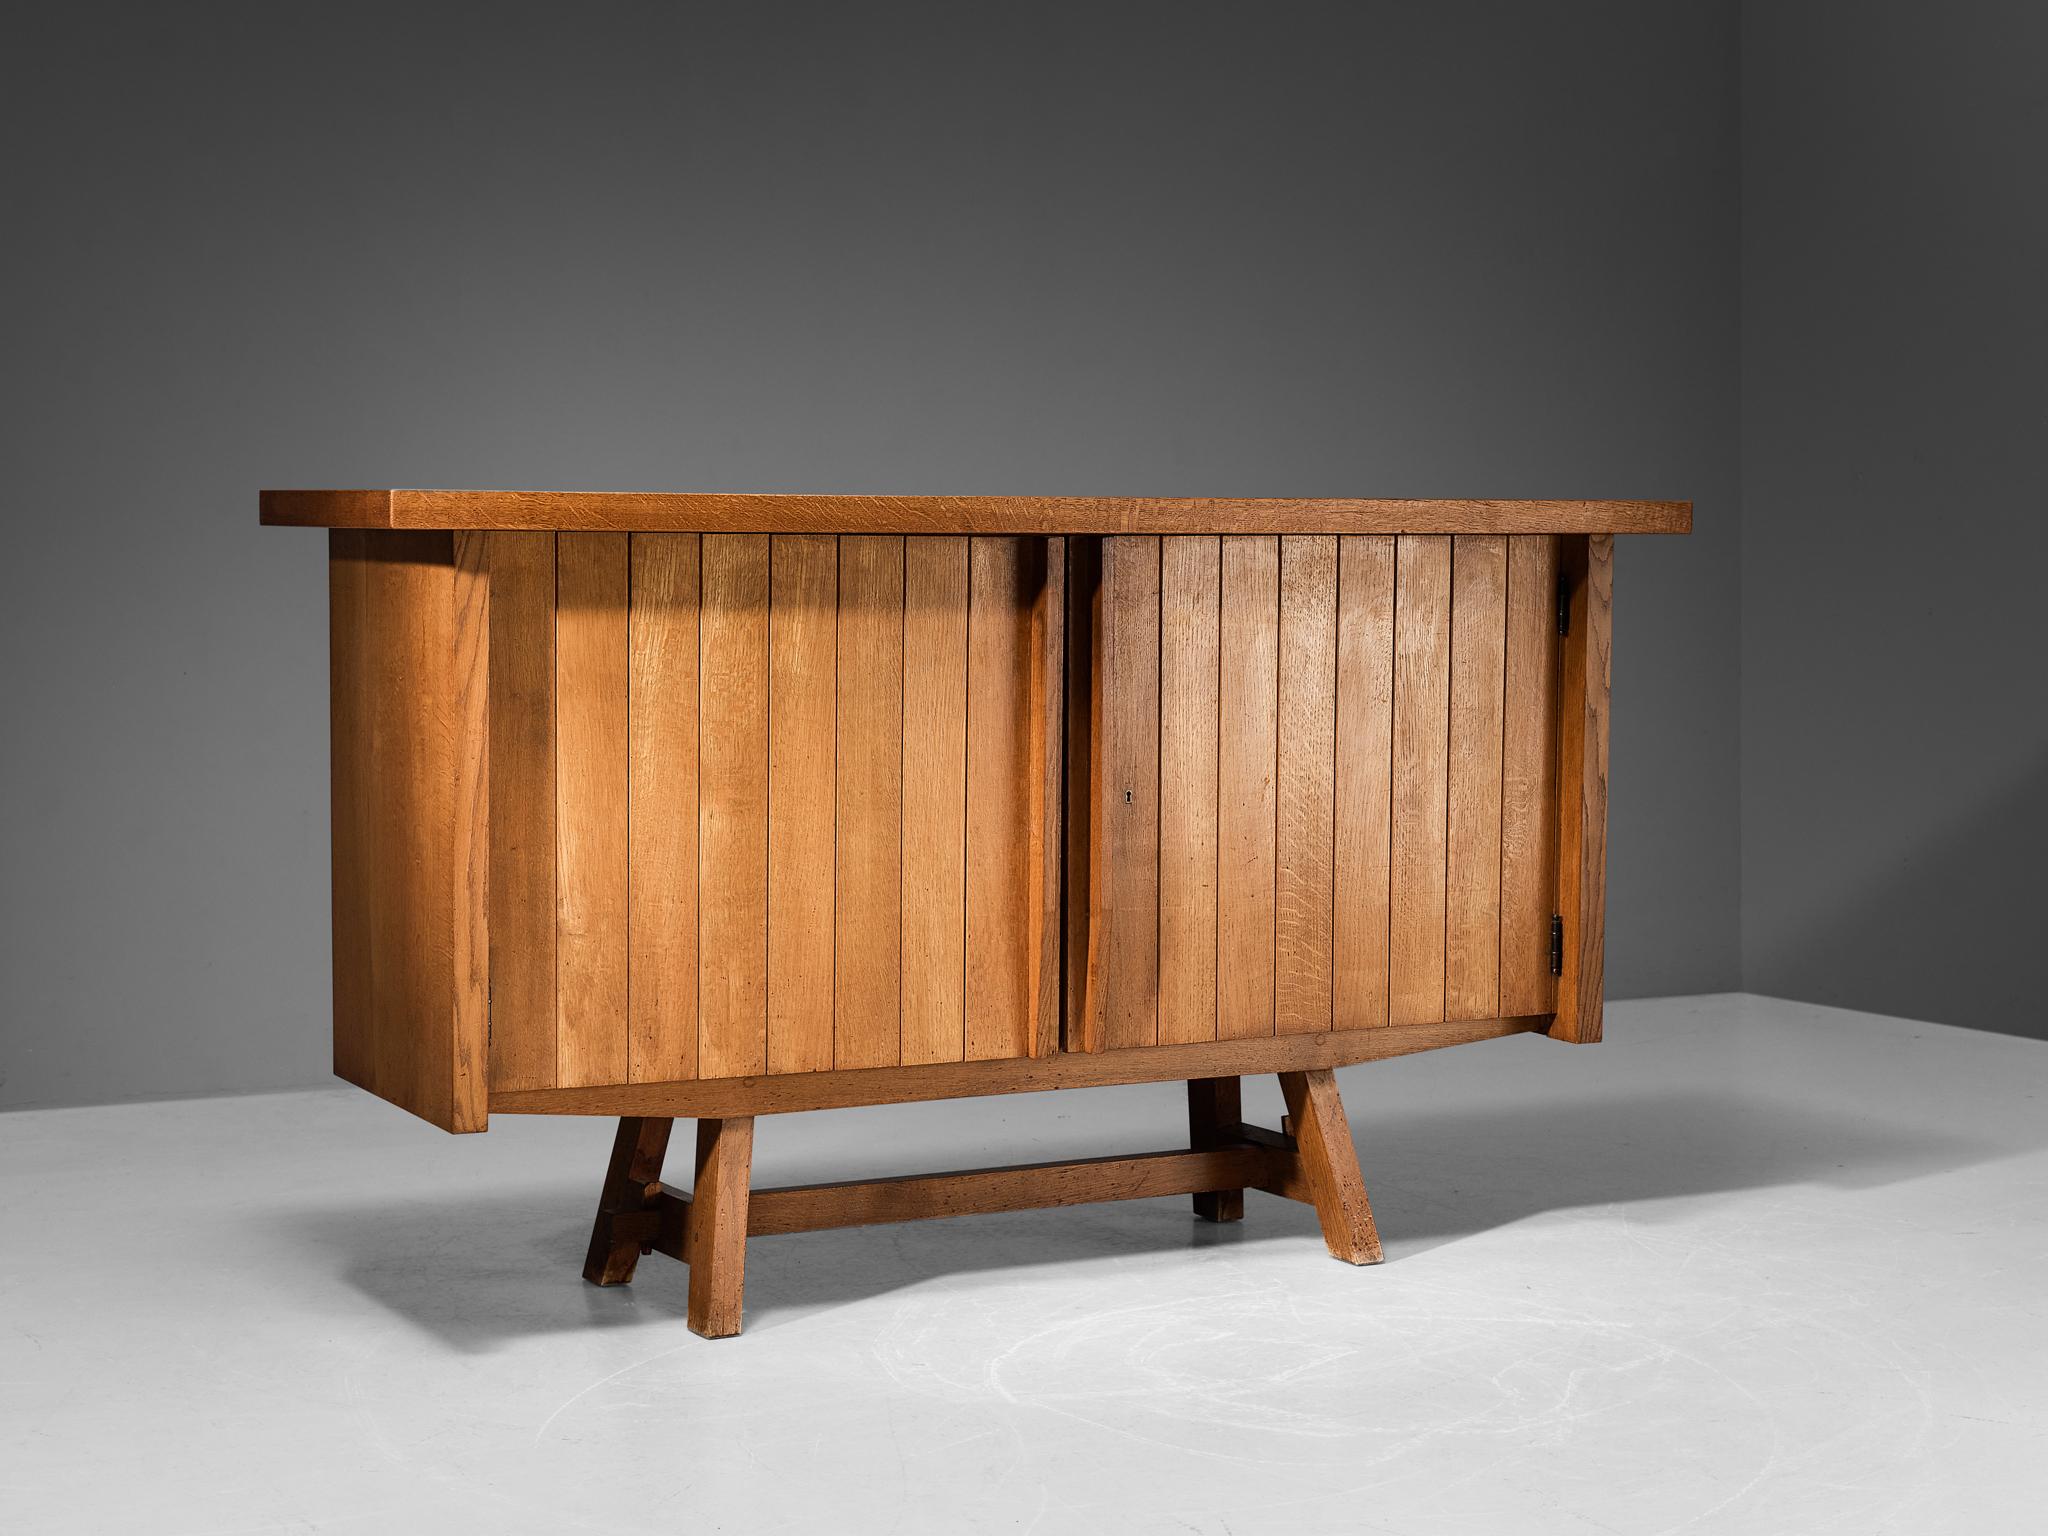 Cabinet, oak, France, 1960s

This elegant sideboard in solid oak provides great storage space. The door panels are composed of carved vertical lines, adding a rhythmic and haptic surface to the front. The corpus is supported by tapered legs, which